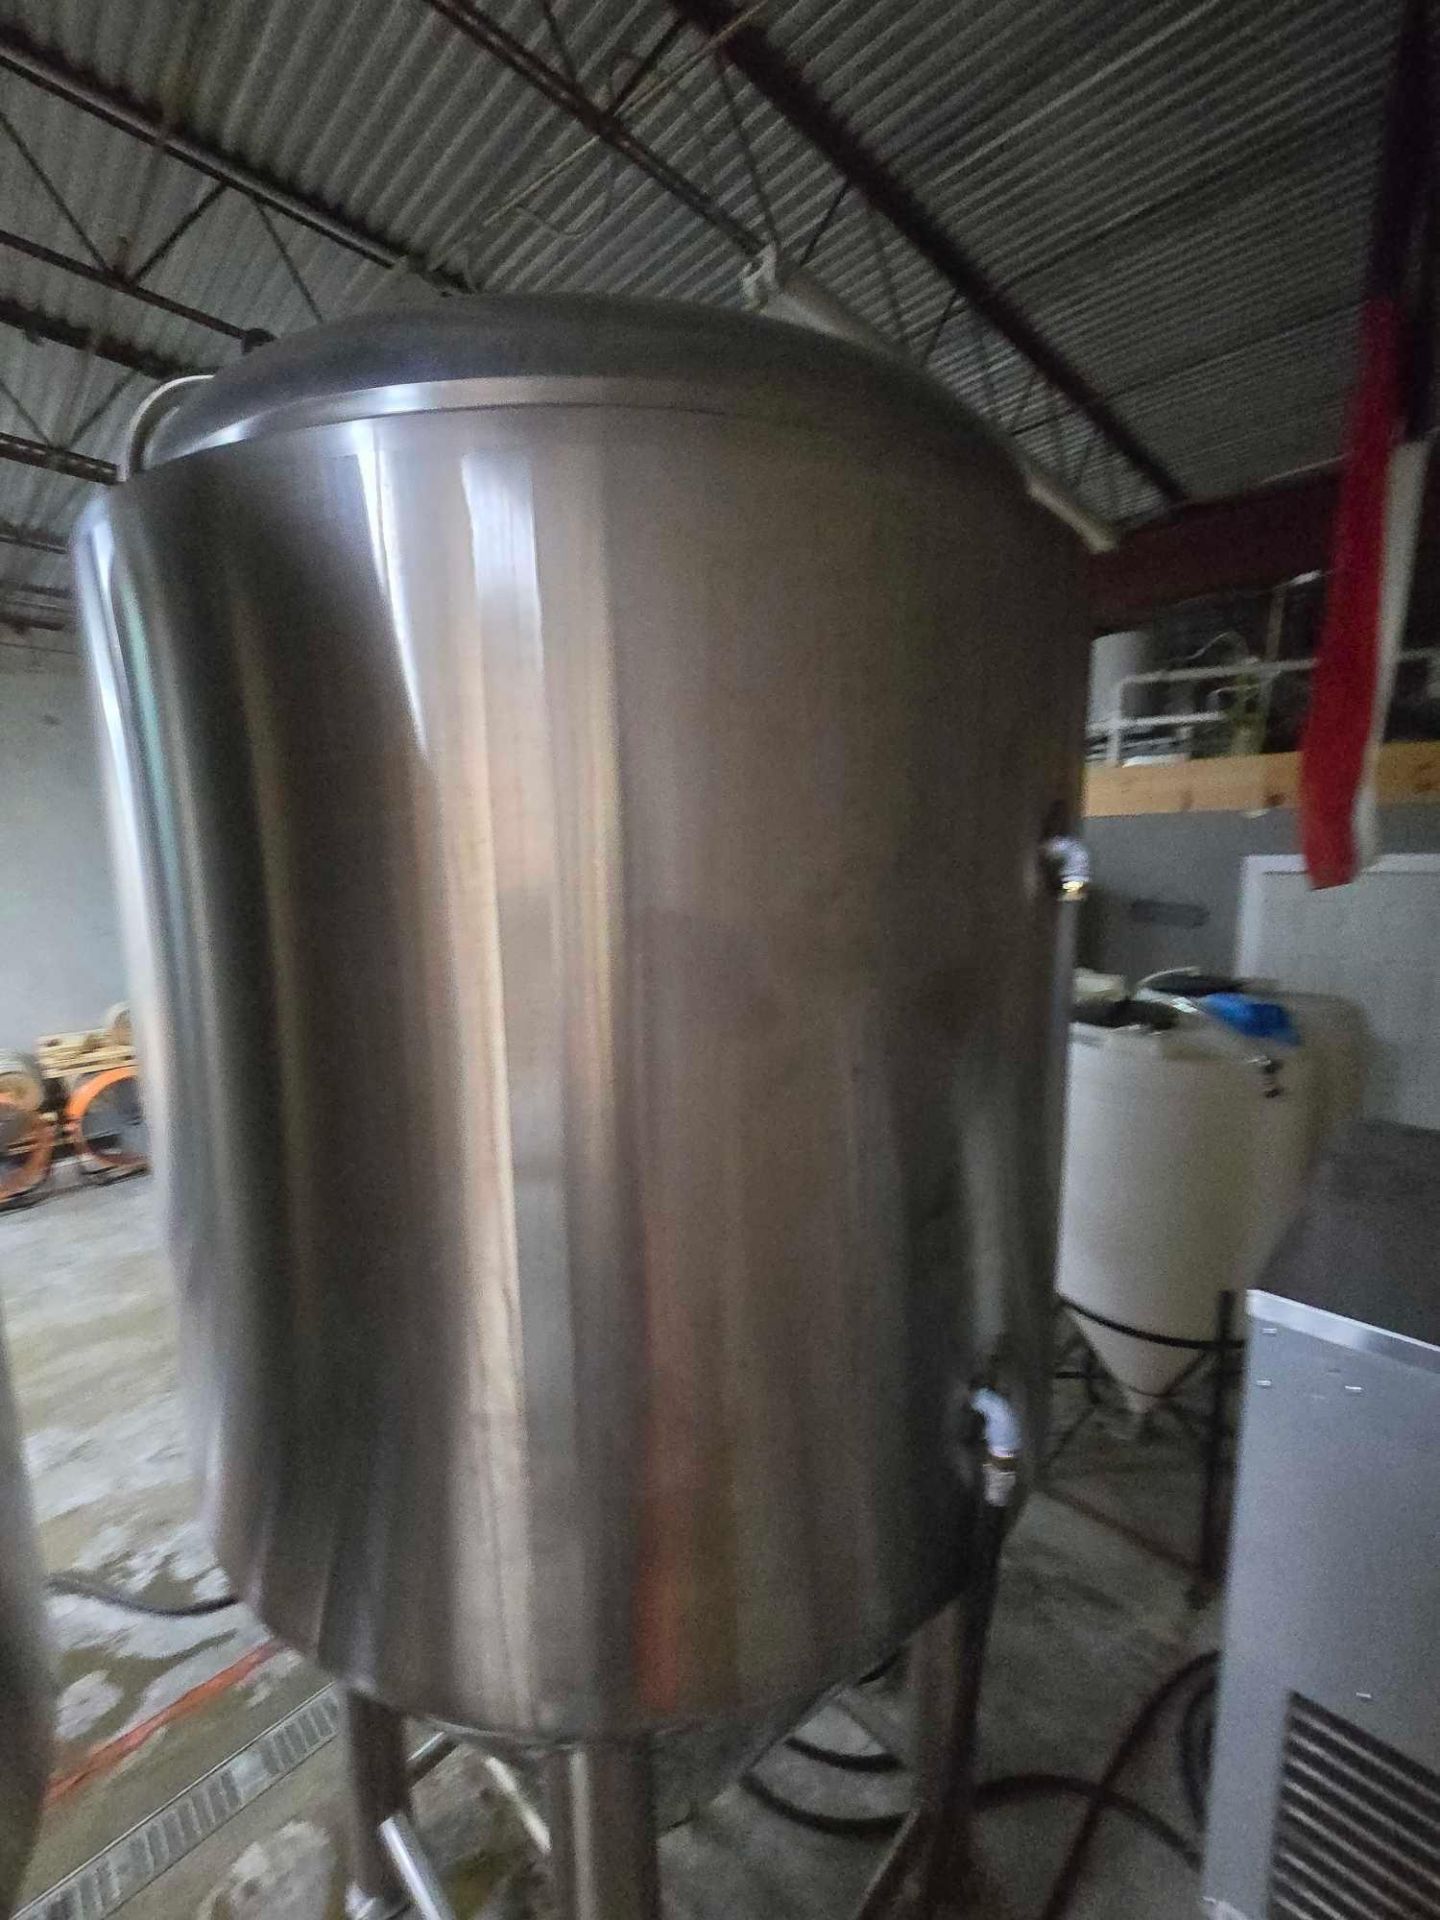 ABS COMMERCIAL15BBL STAINLESS STEEL CONE BOTTOM TANK MFG. 2017 #1 - Image 7 of 10